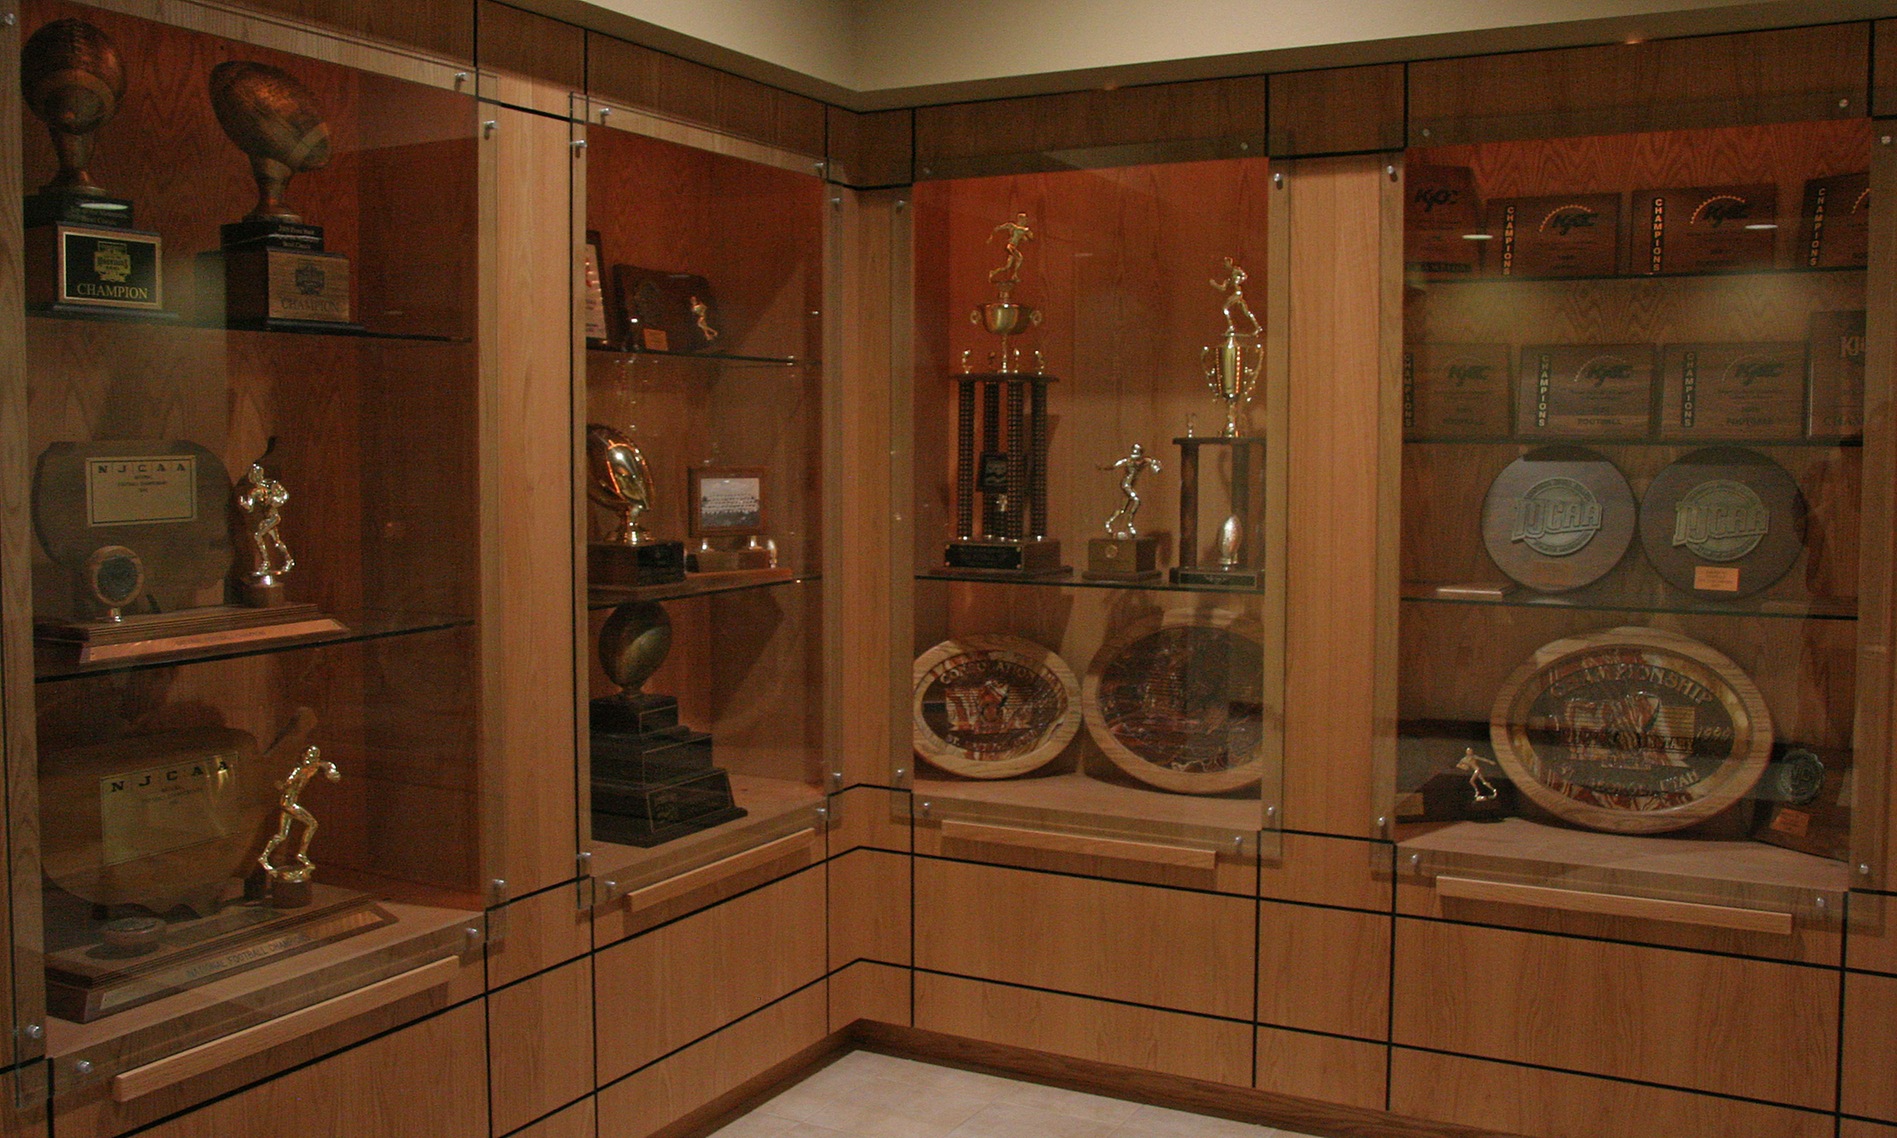 The trophy case inside the Criss Football Complex